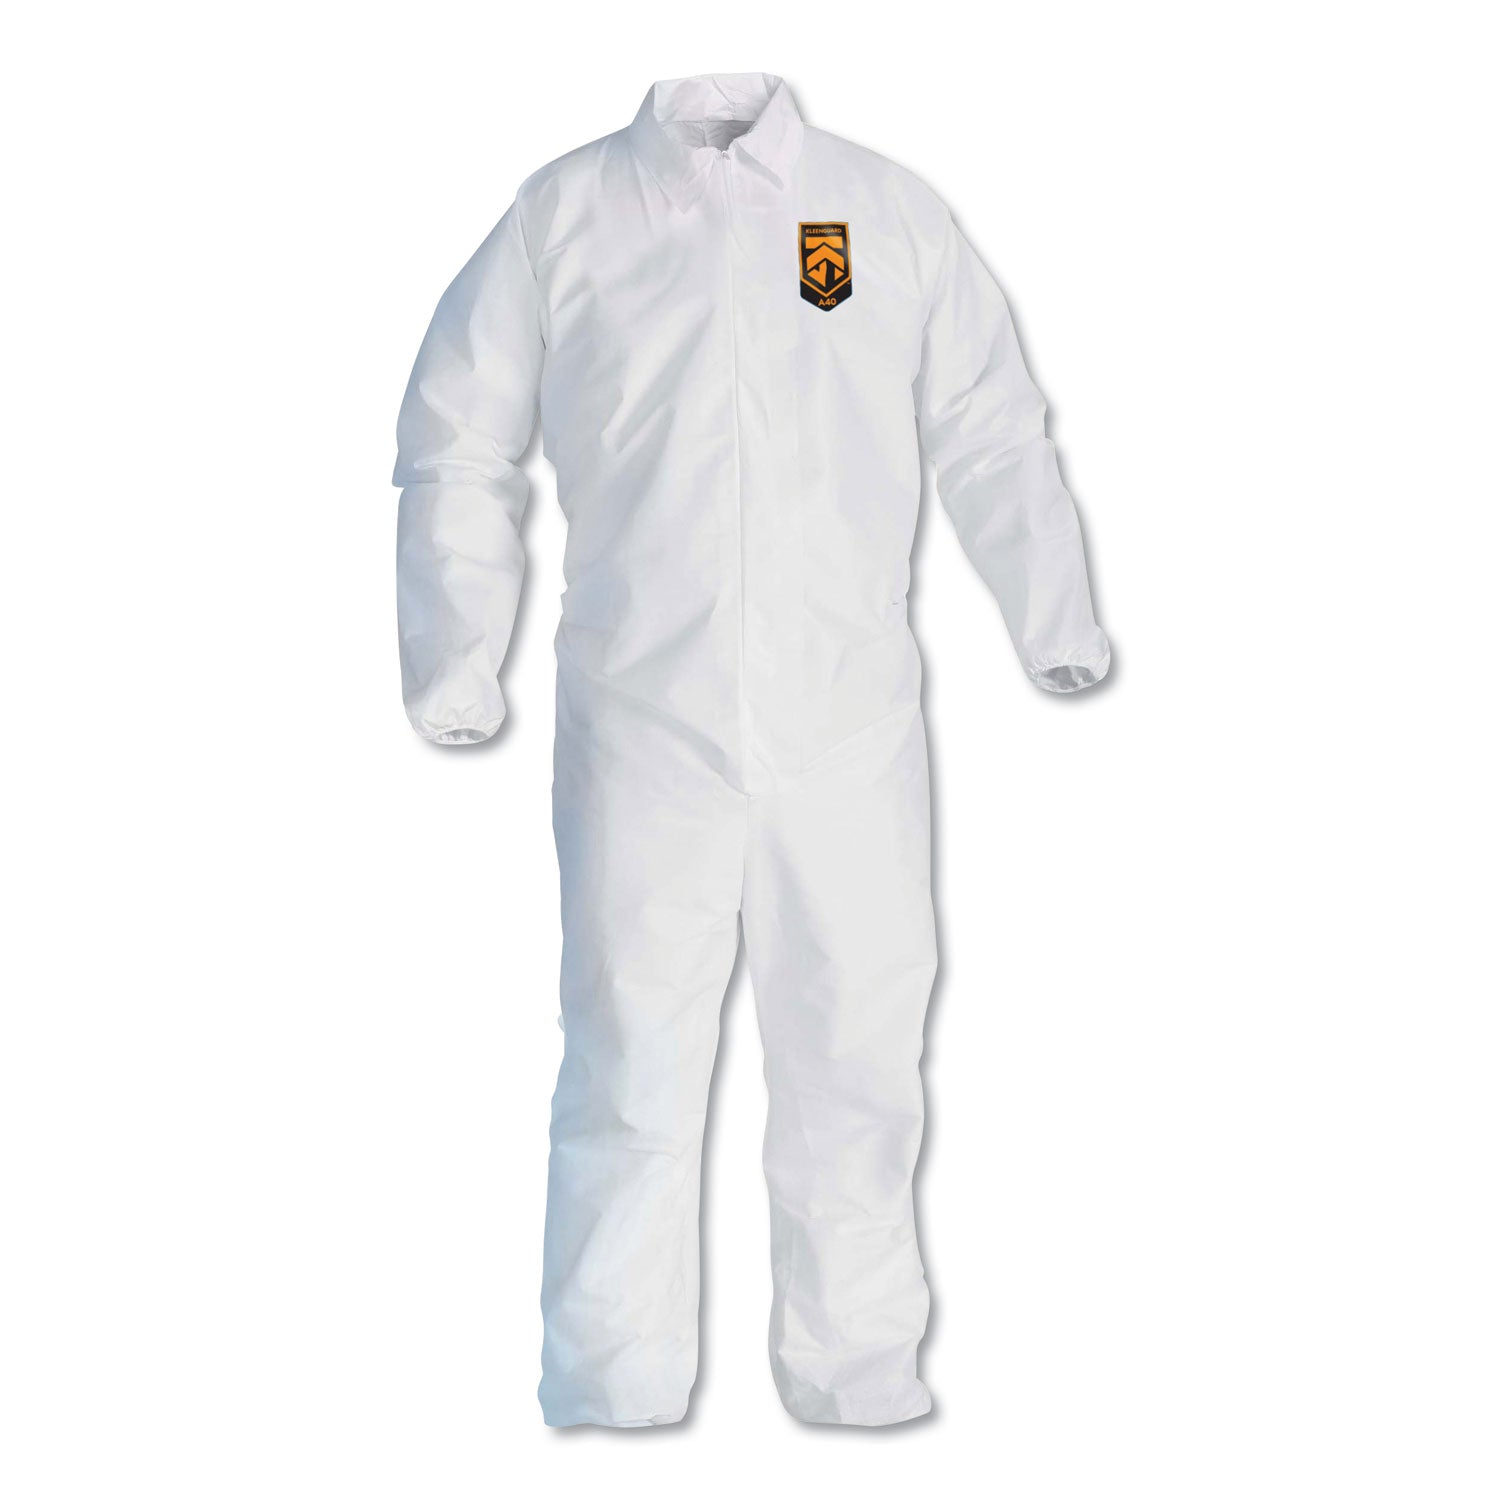 a40-elastic-cuff-and-ankles-coveralls-white-large-25-carton_kcc44313 - 1